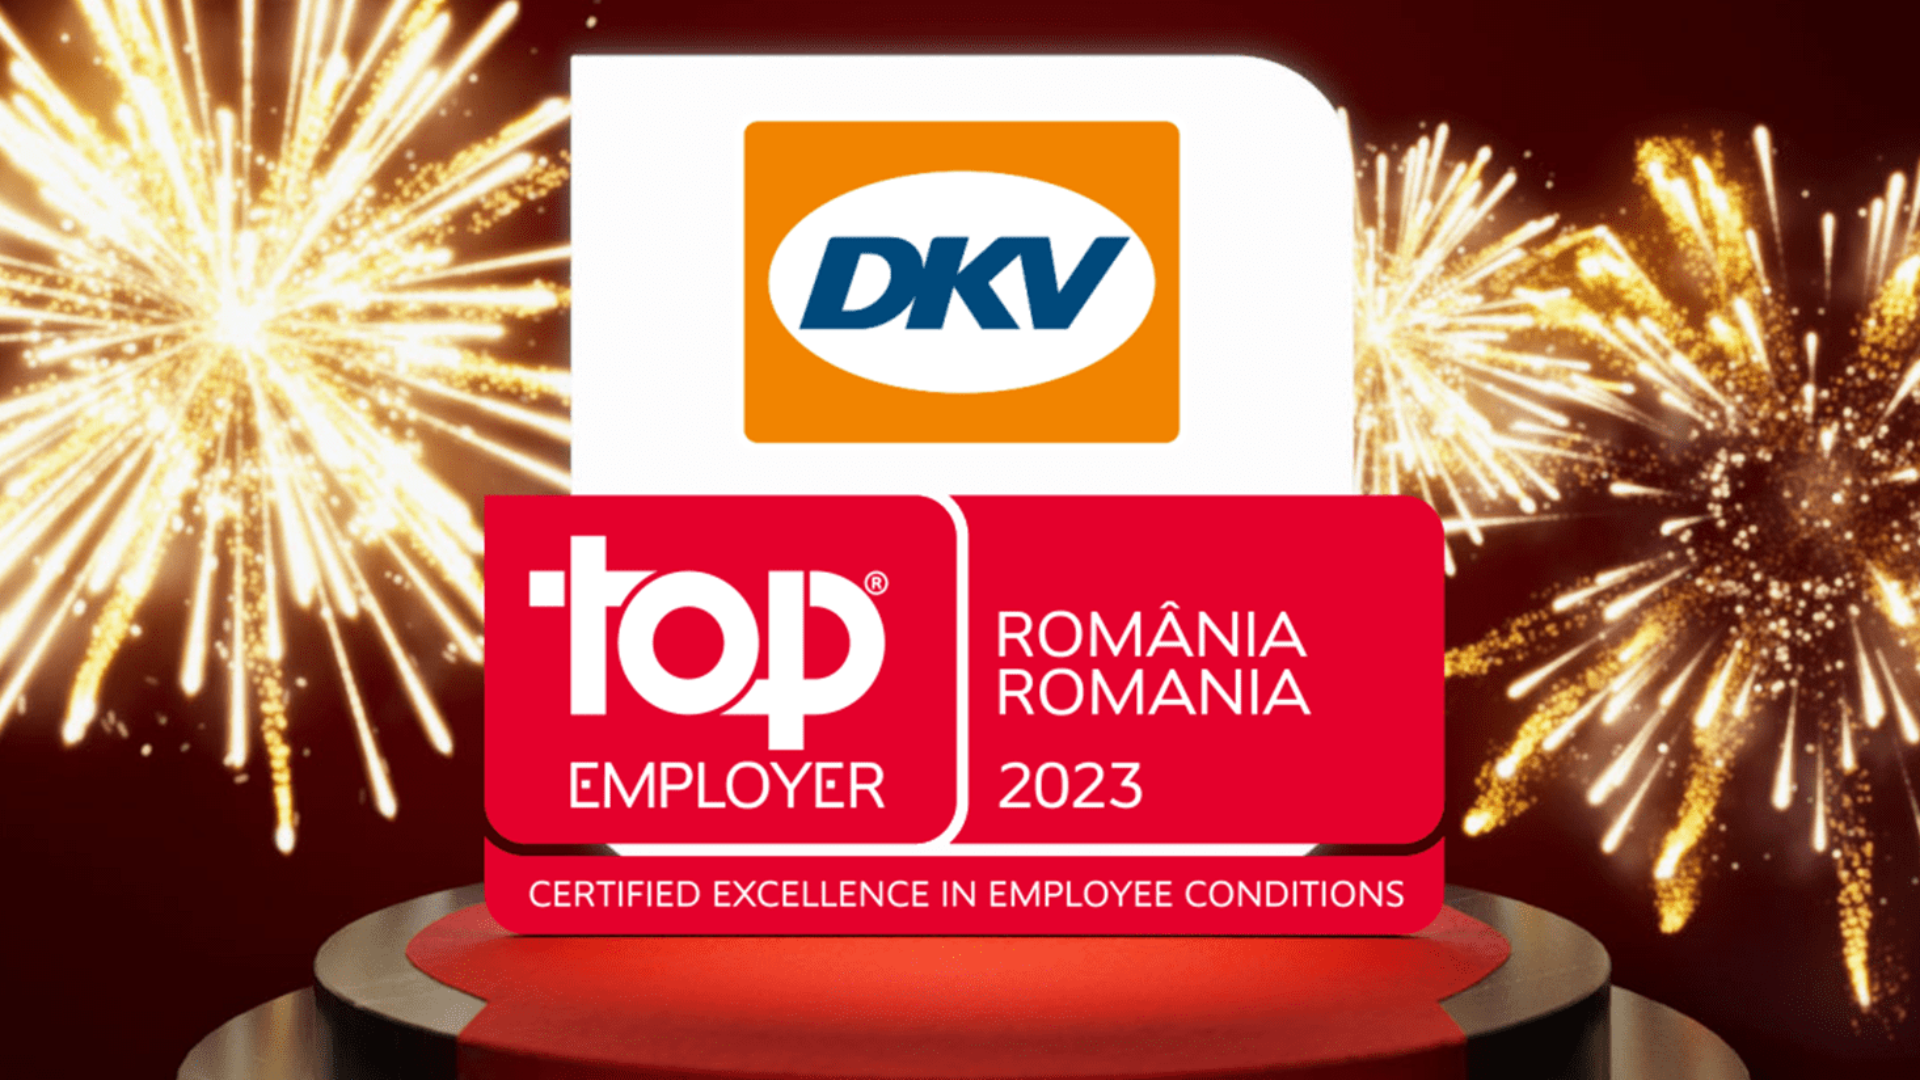 DKV Romania certified as a Top Employer by the Top Employers Institute, recognized for excellence in people practices.